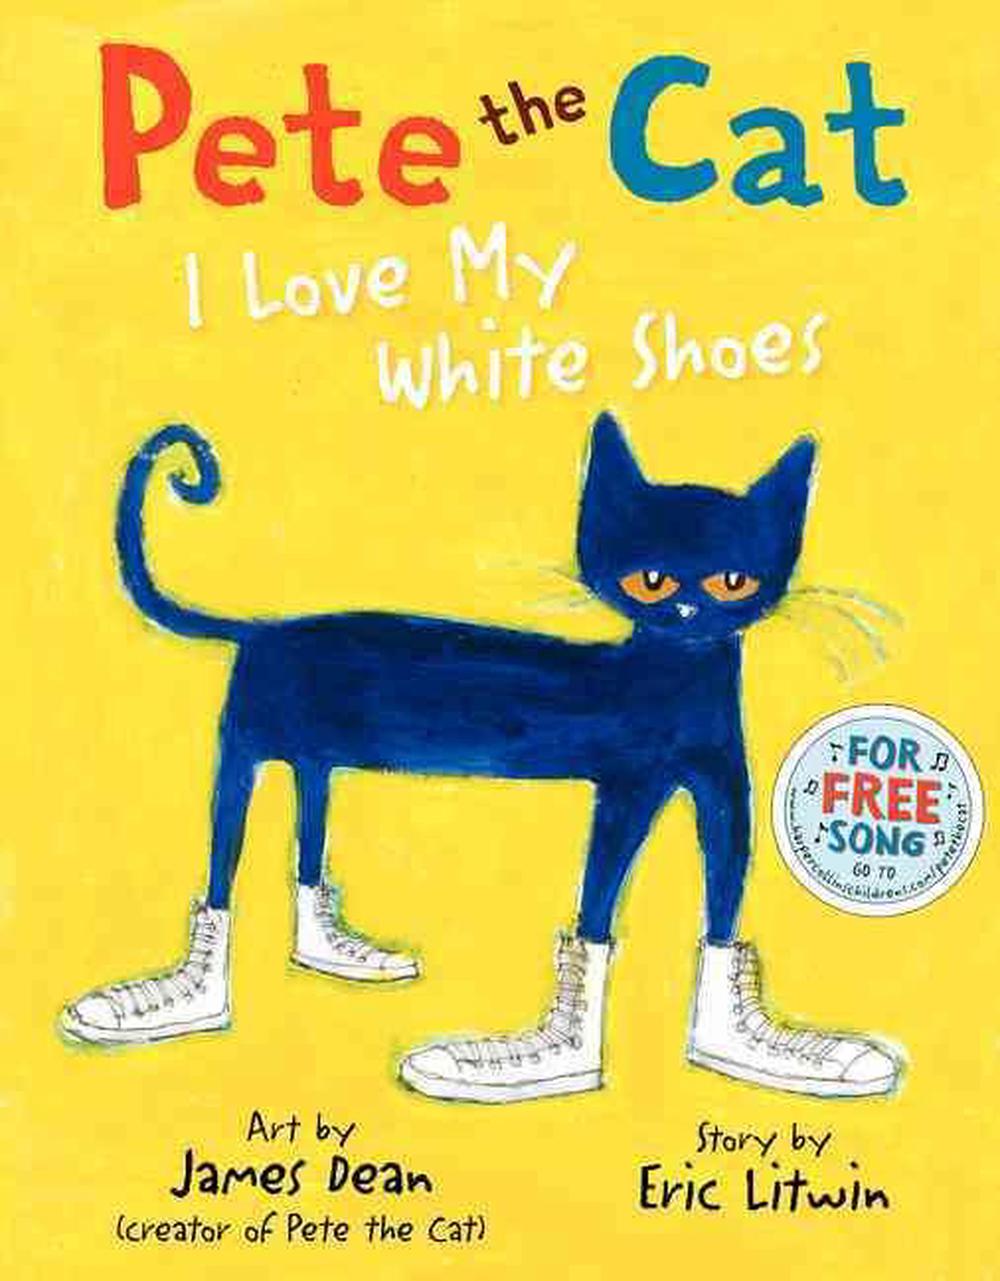 I love this new book and so do my students! I love my white shoes